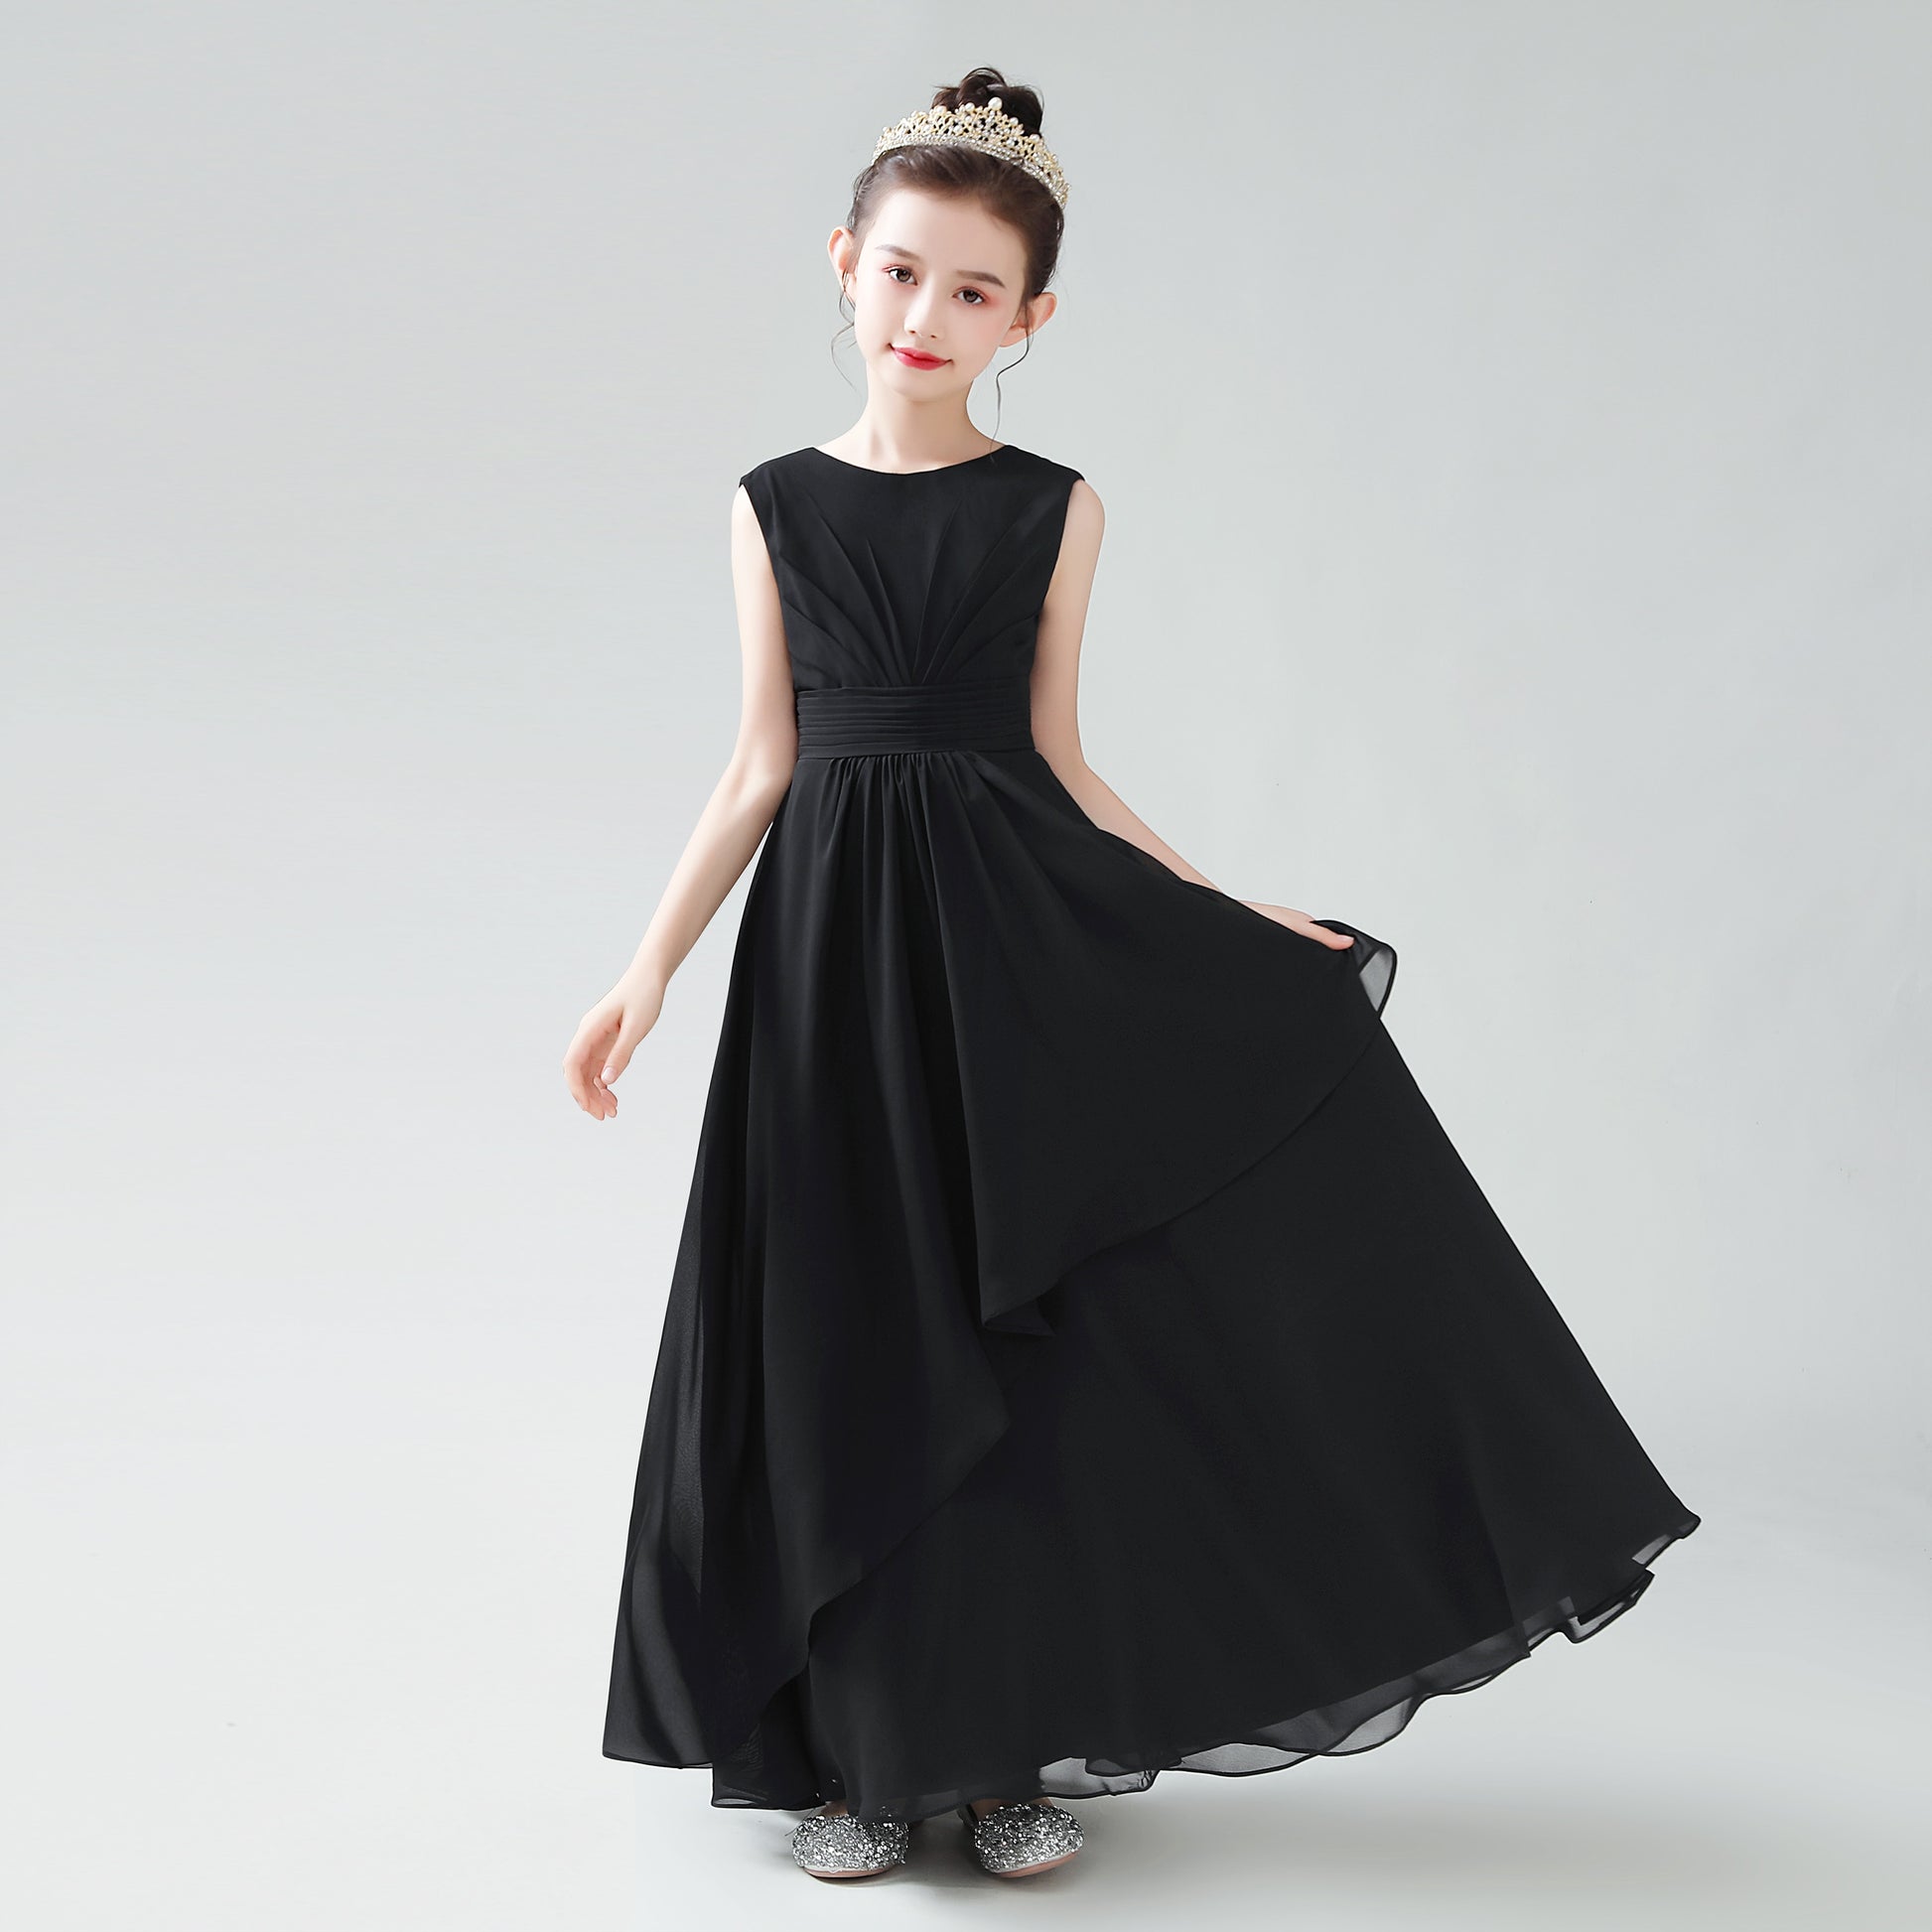 Vestido para Niña Real Pictures Chiffon Flower Girl Dress For Wedding Party First Communion Little Bride Gowns Junior Bridesmaid Black